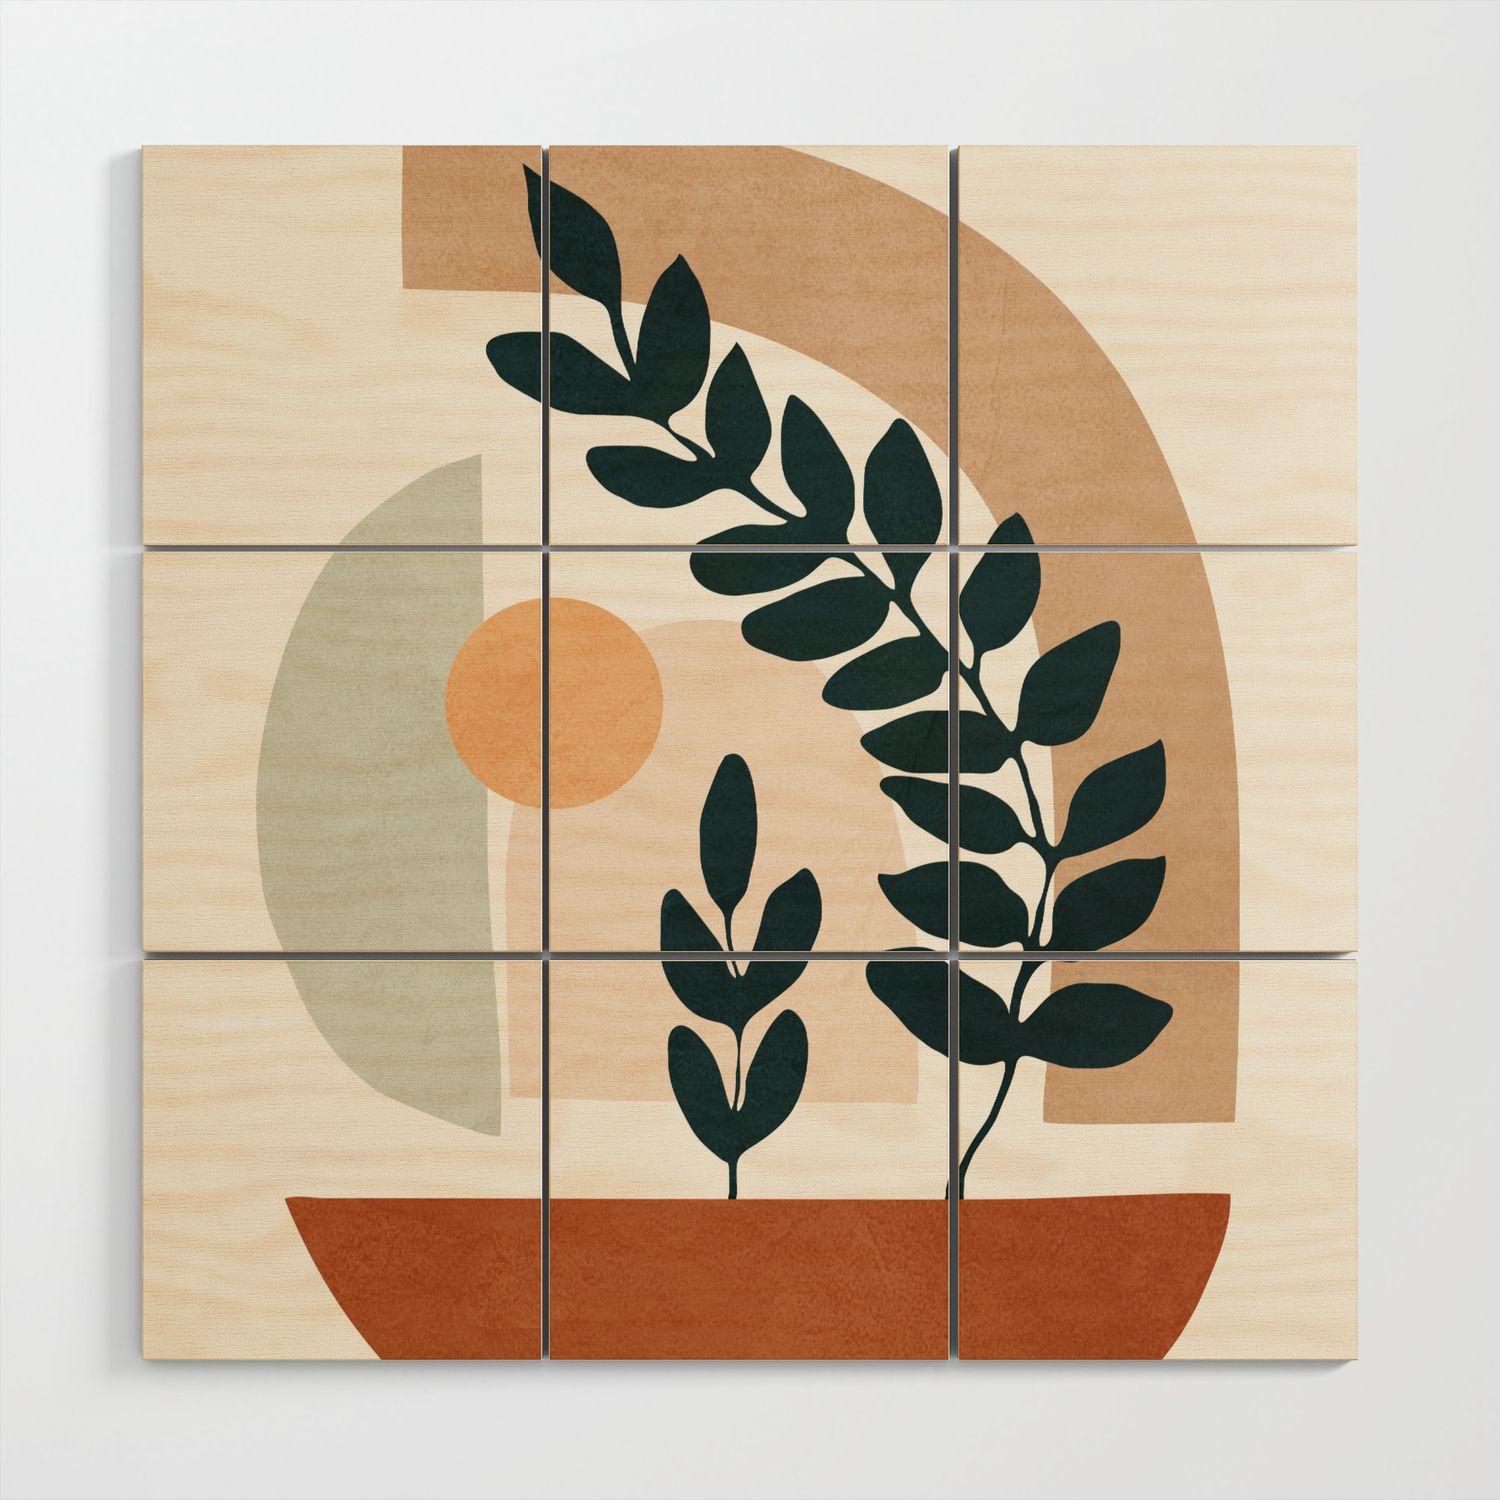 Soft Shapes Iii Wood Wall Artcity Art | Society6 Throughout Soft Shapes Wall Art (View 13 of 15)